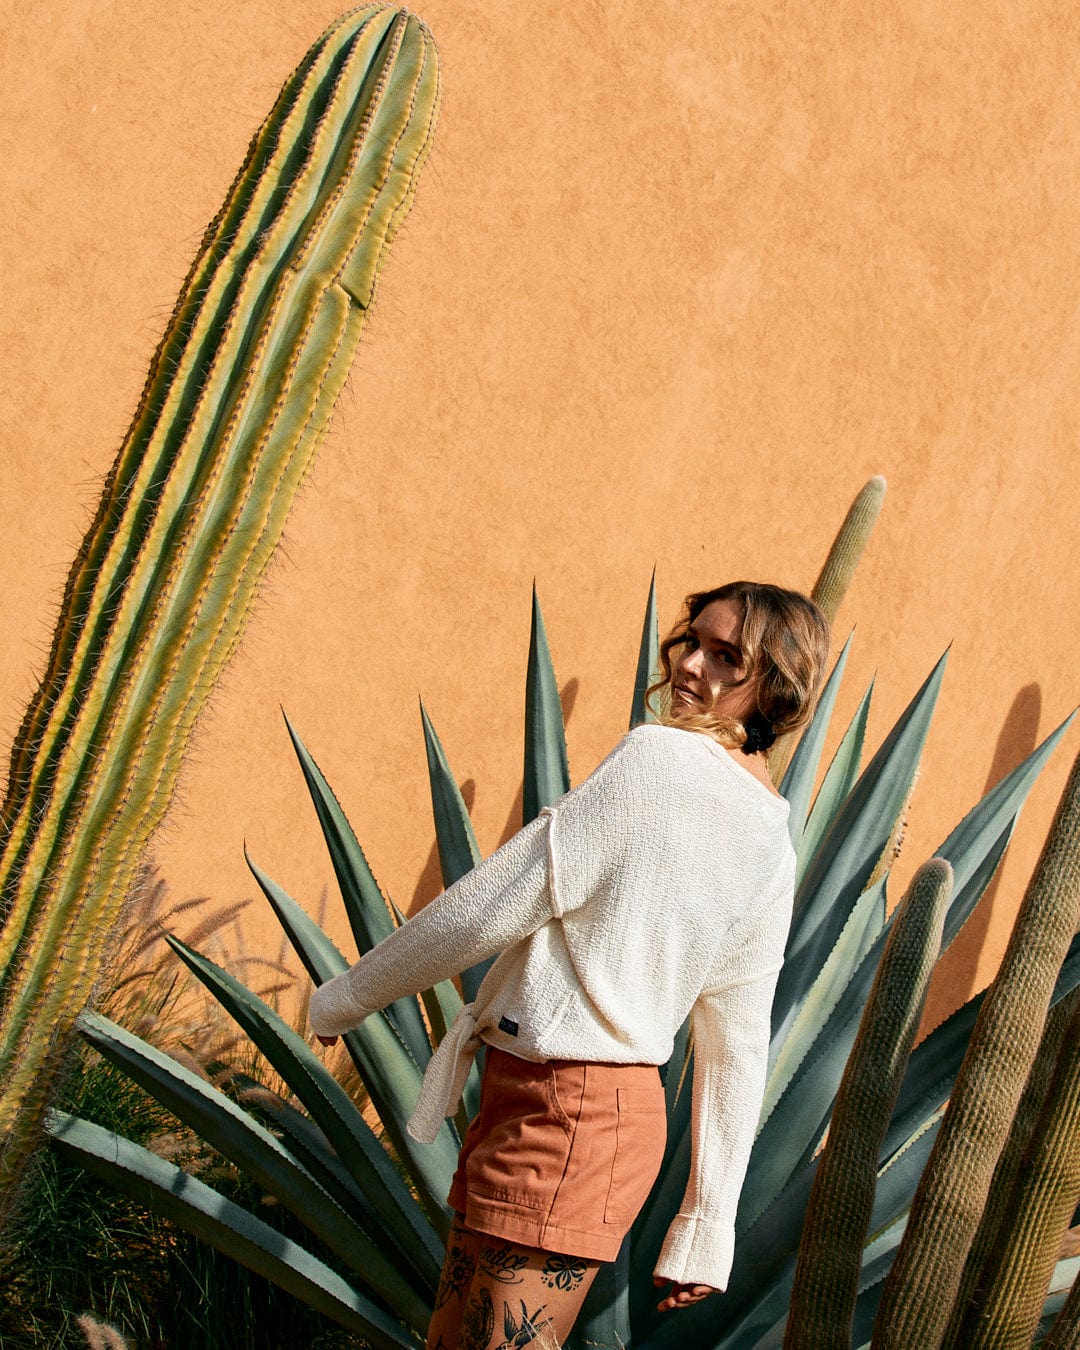 A woman looking over her shoulder near tall cacti and agave plants, against an orange textured wall, wearing a Saltrock Beachcomber - Womens Tie Waist Jumper in Cream and terracotta tie-waist shorts.